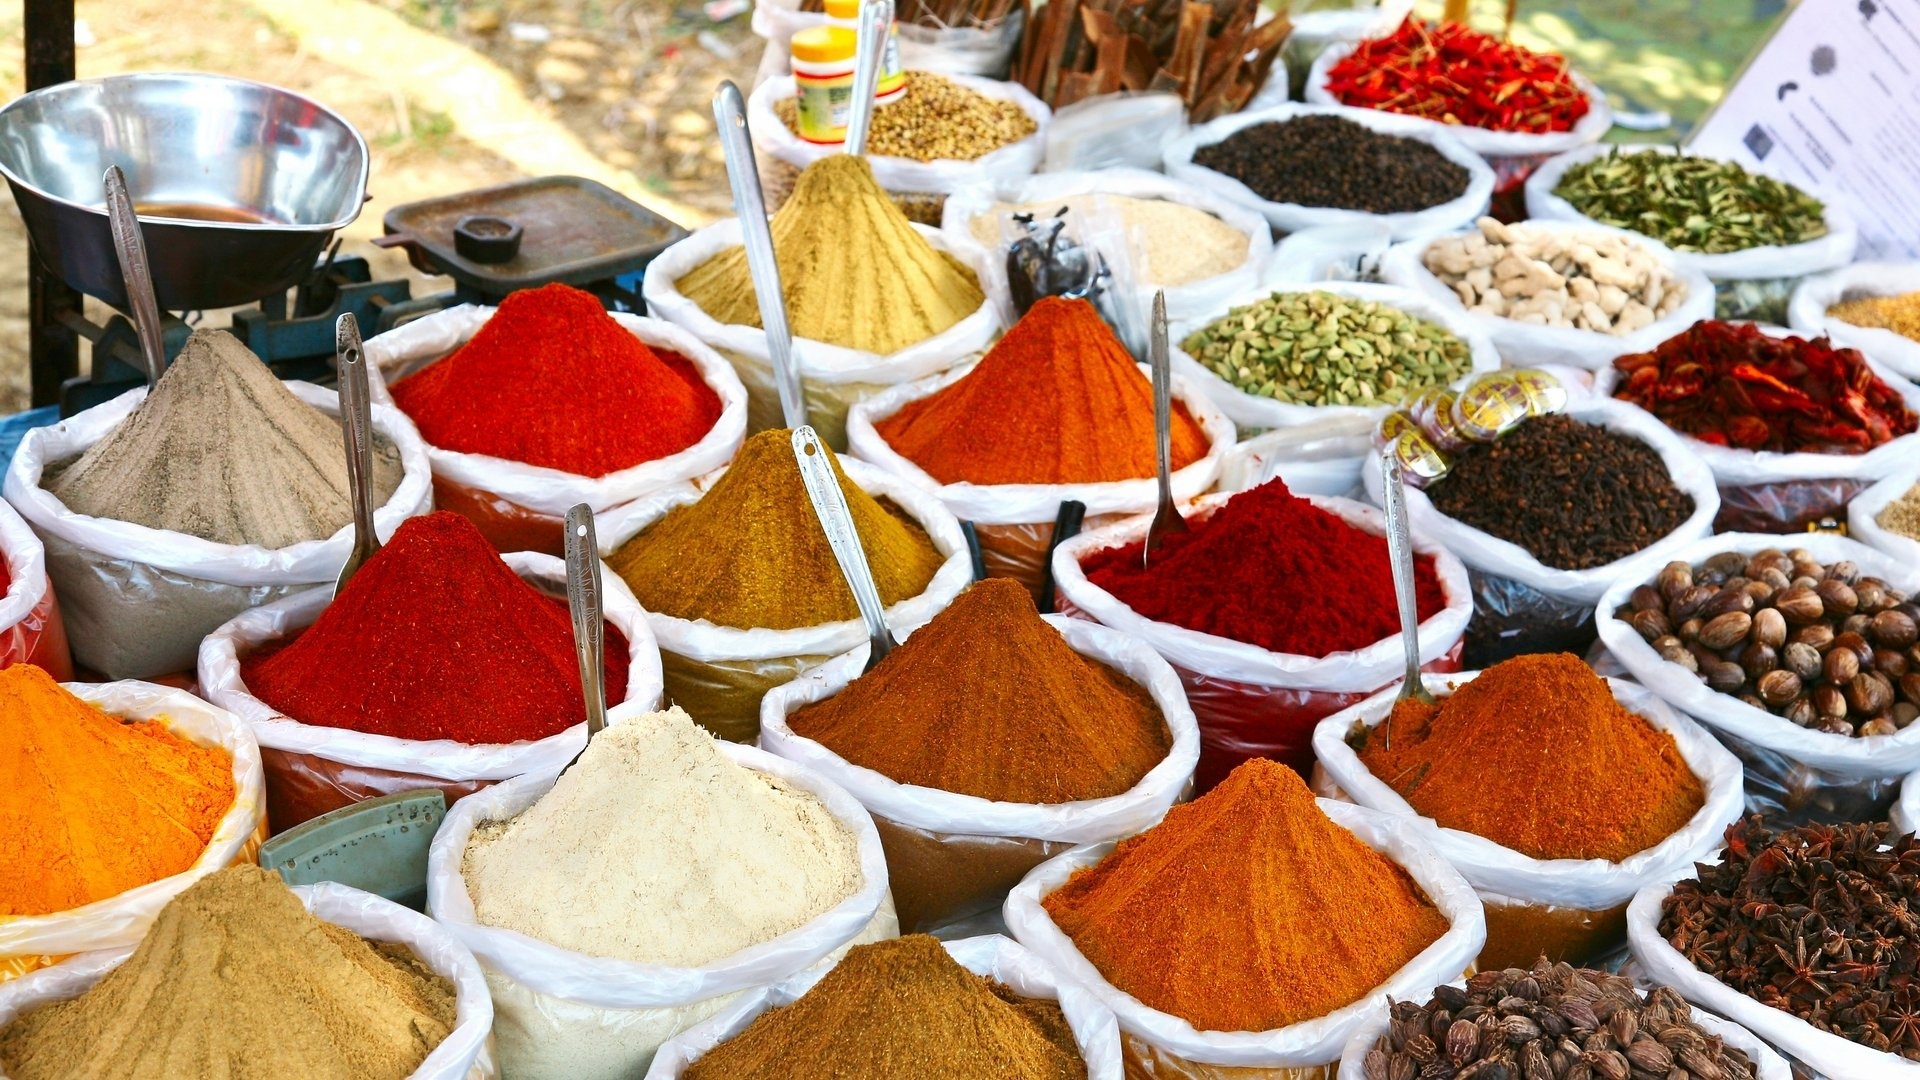 Spices: Red chili powder, Used alone or blended, whole or powdered. 1920x1080 Full HD Background.